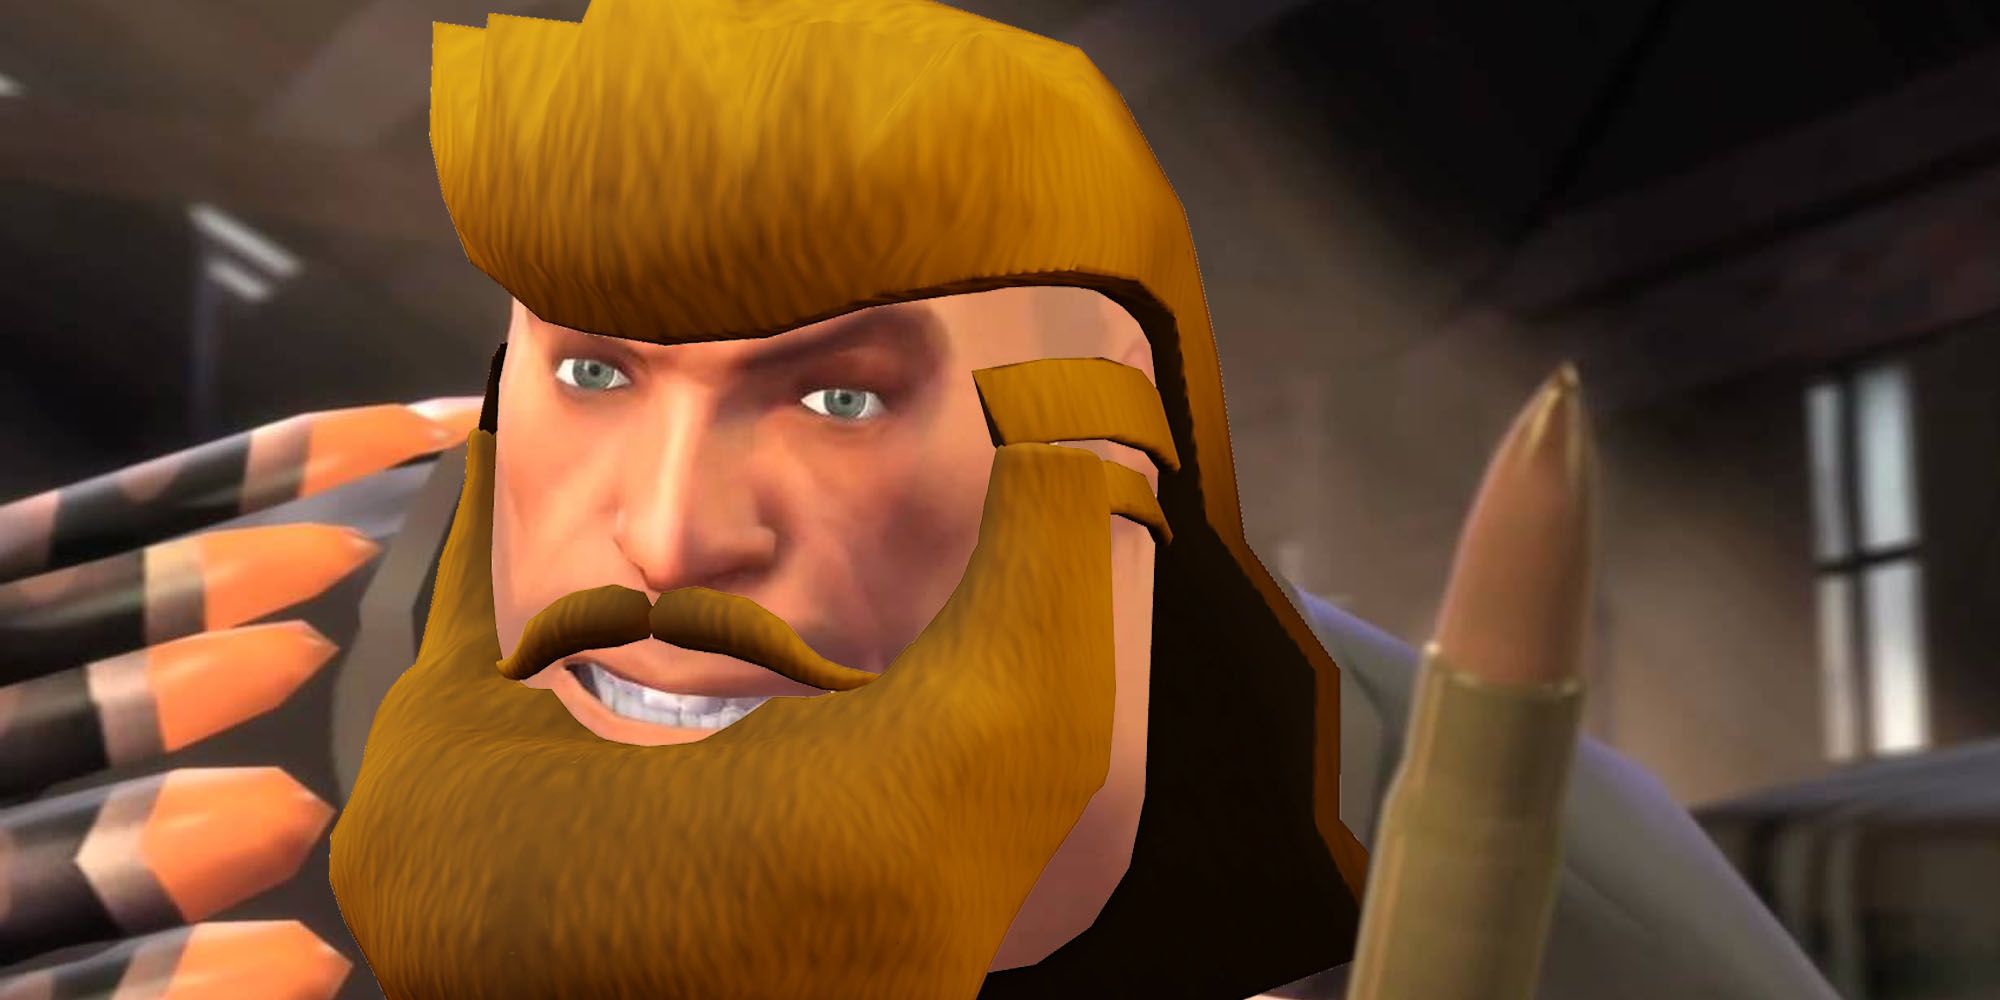 Team Fortress 2 Heavy with a mullet and beard Photoshopped on